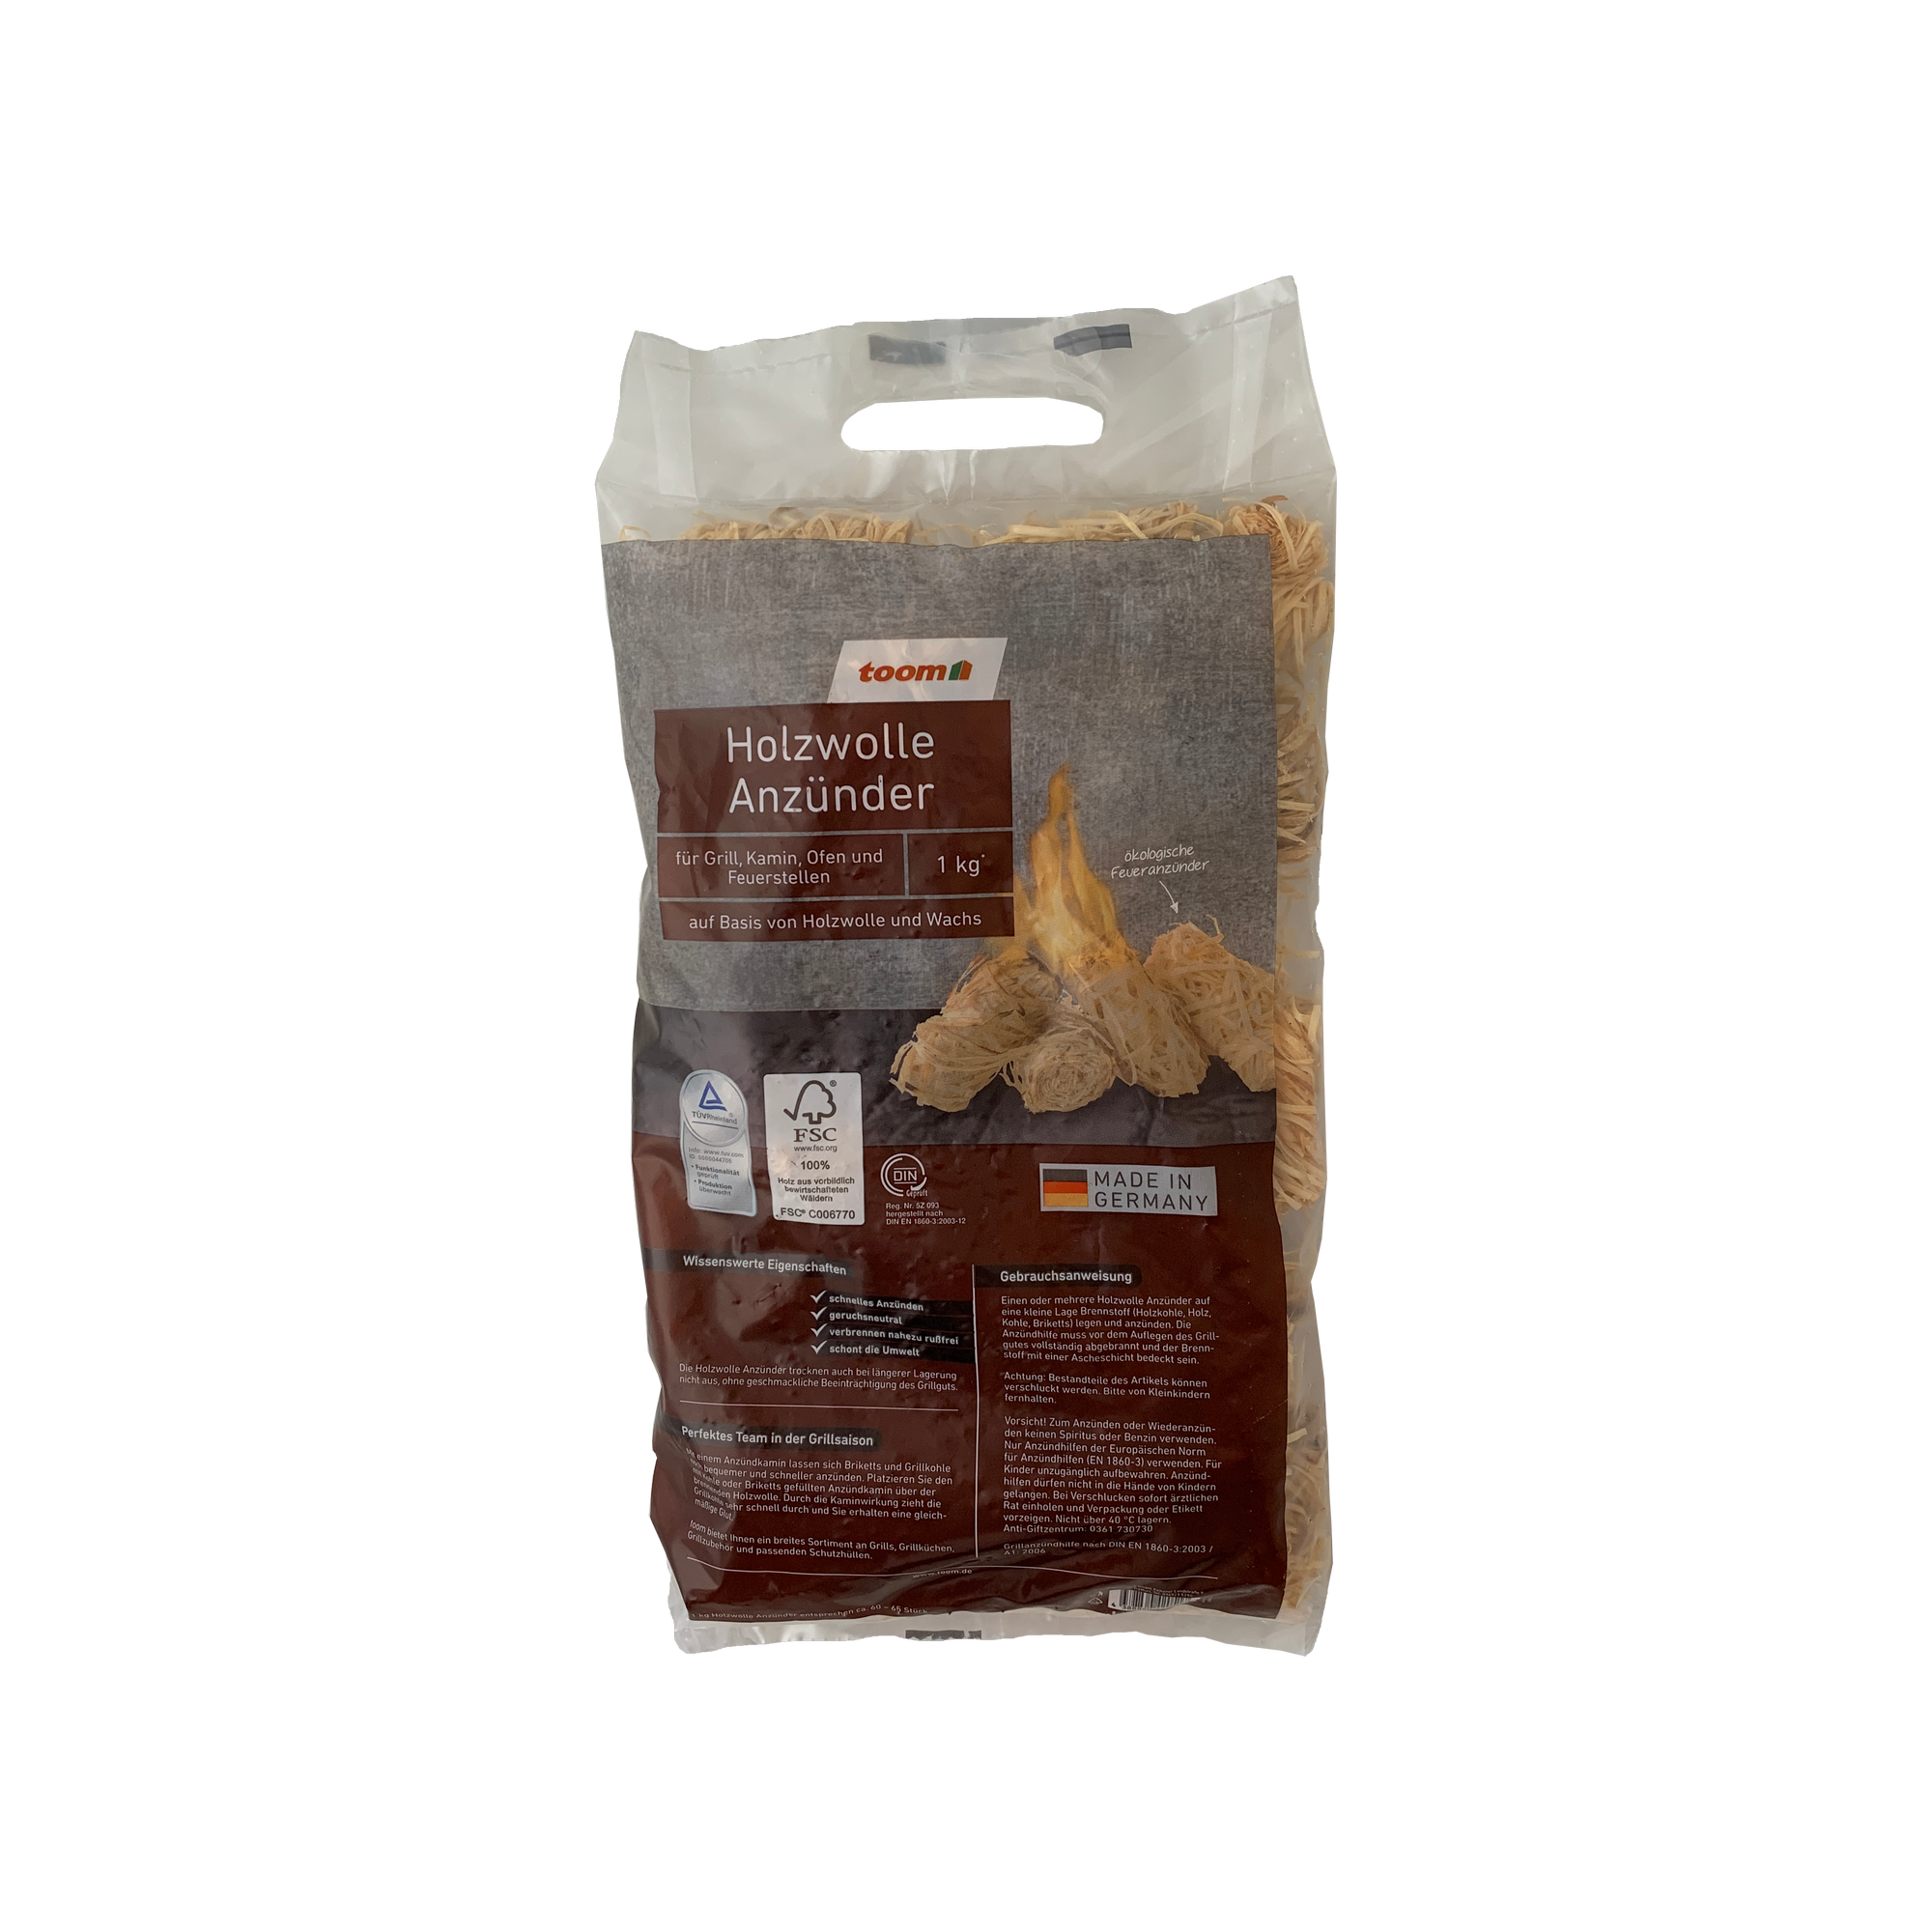 Holzwolle-Anzünder 1 kg + product picture